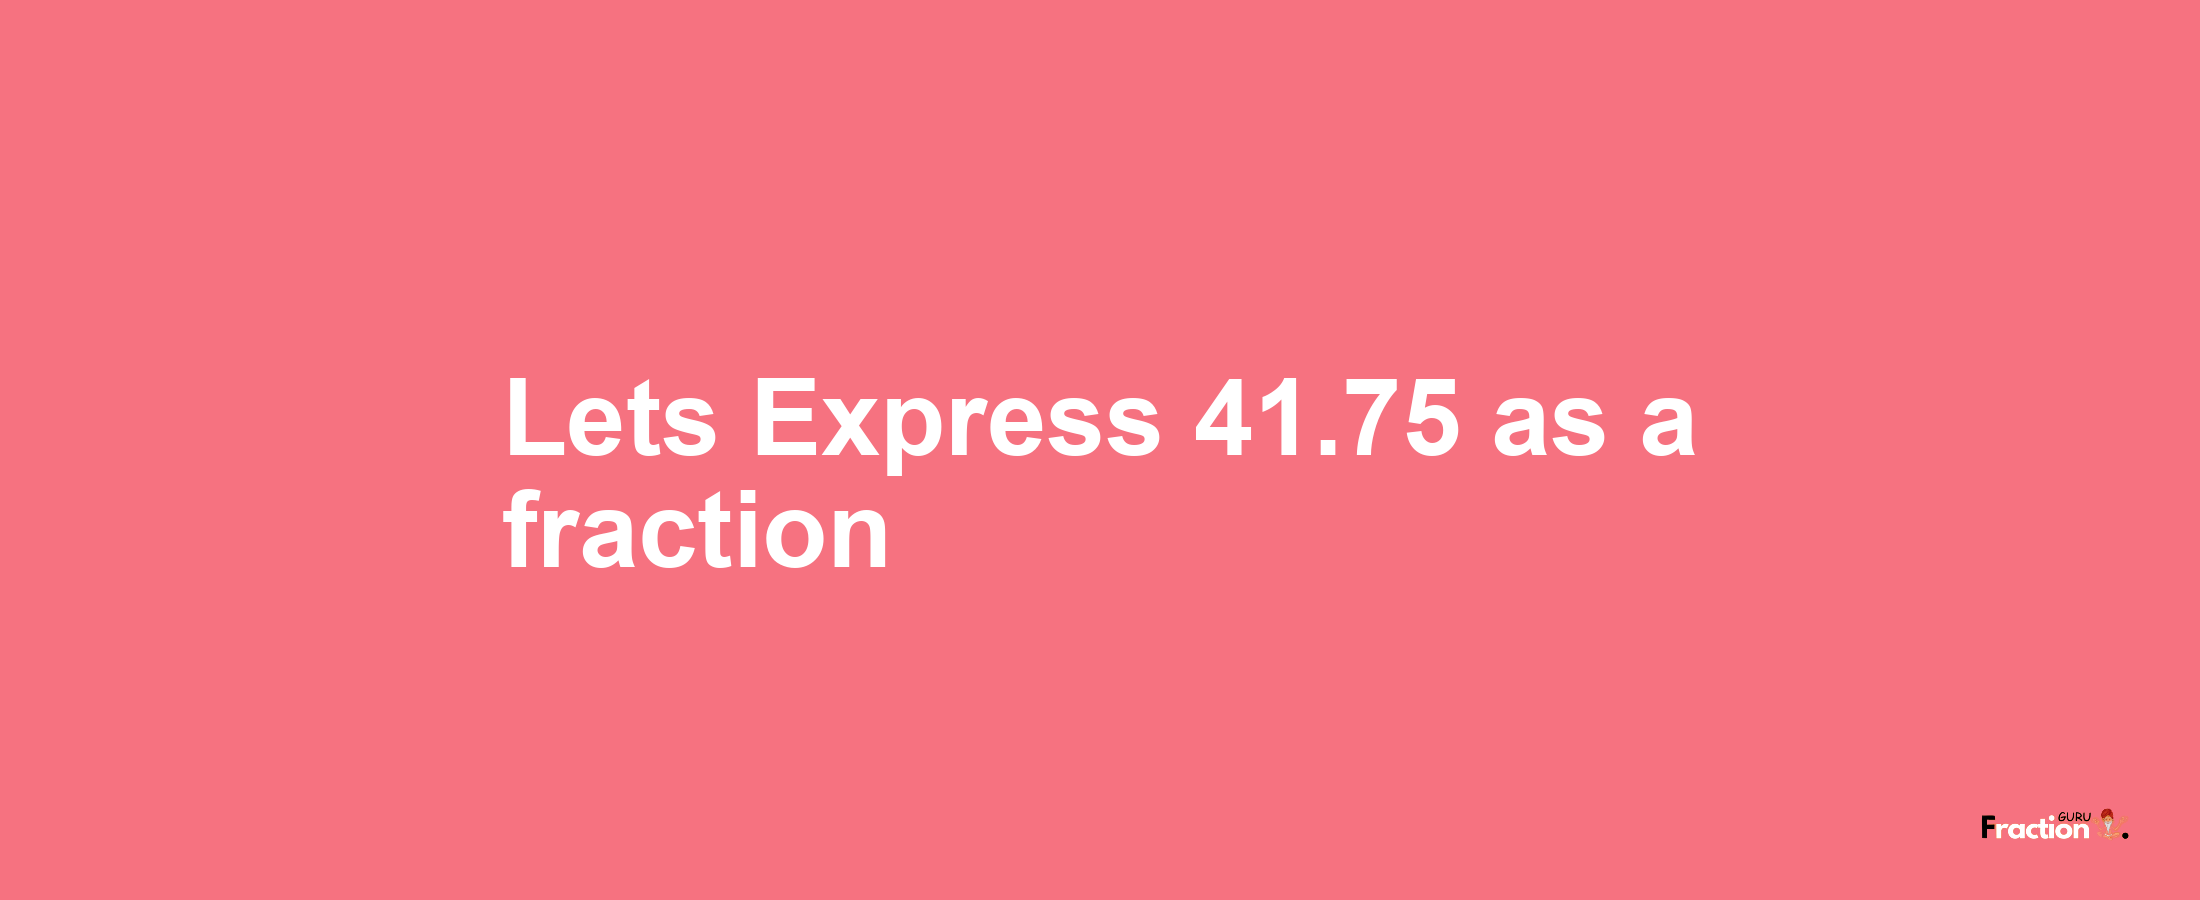 Lets Express 41.75 as afraction